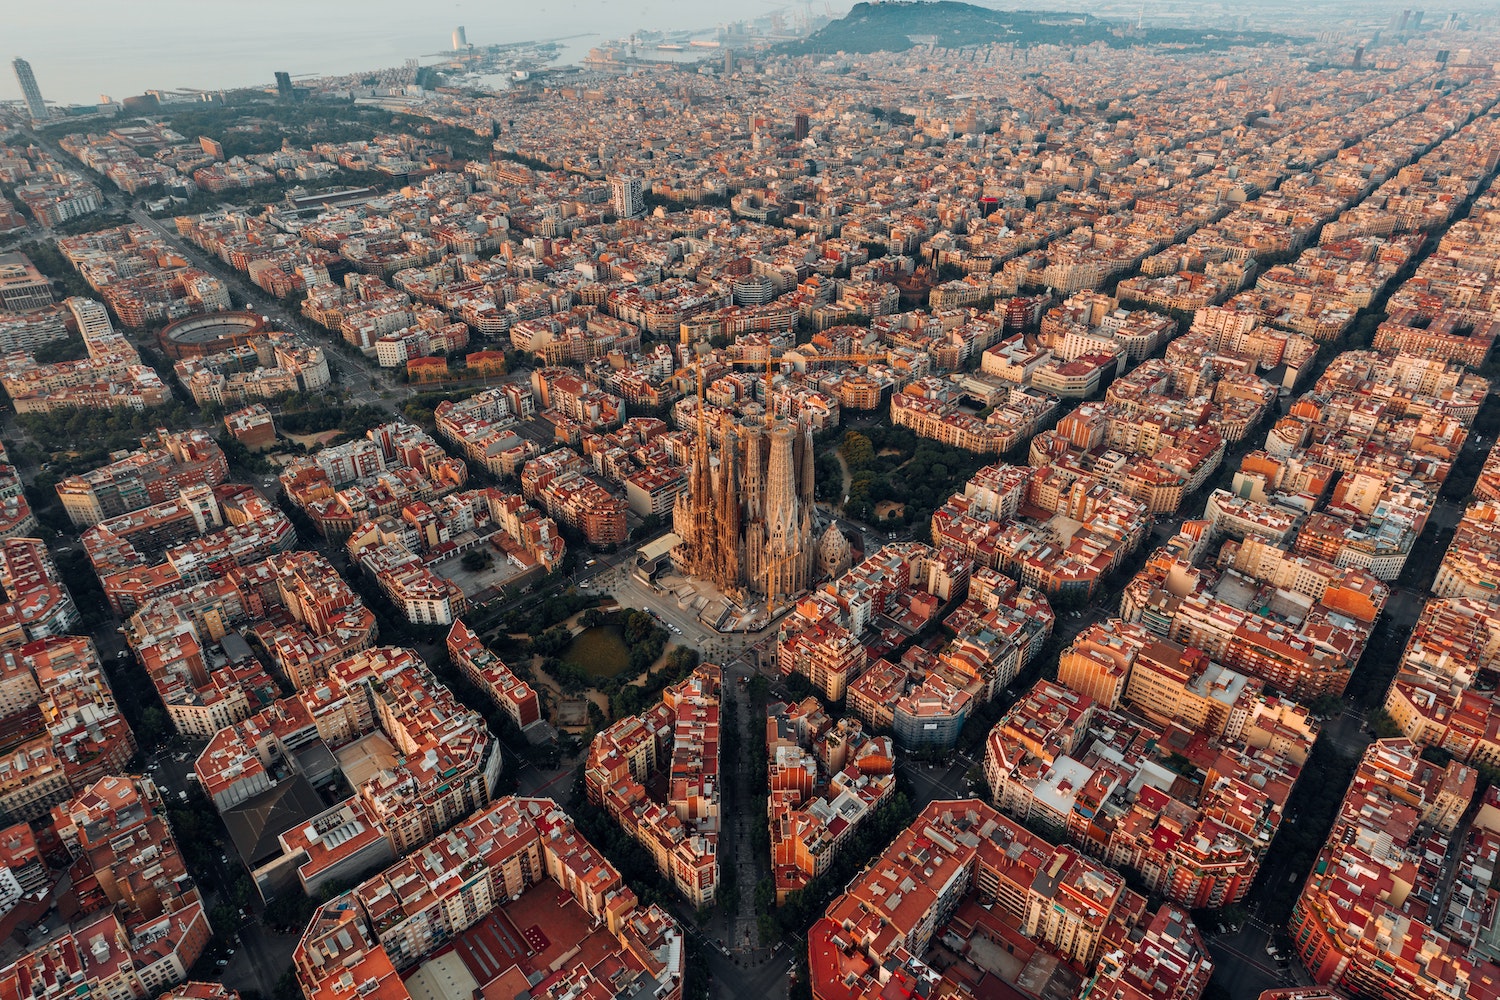 Birds-eye view of the uniquely shaped blocks of Barcelona Spain and their octagonal intersections.